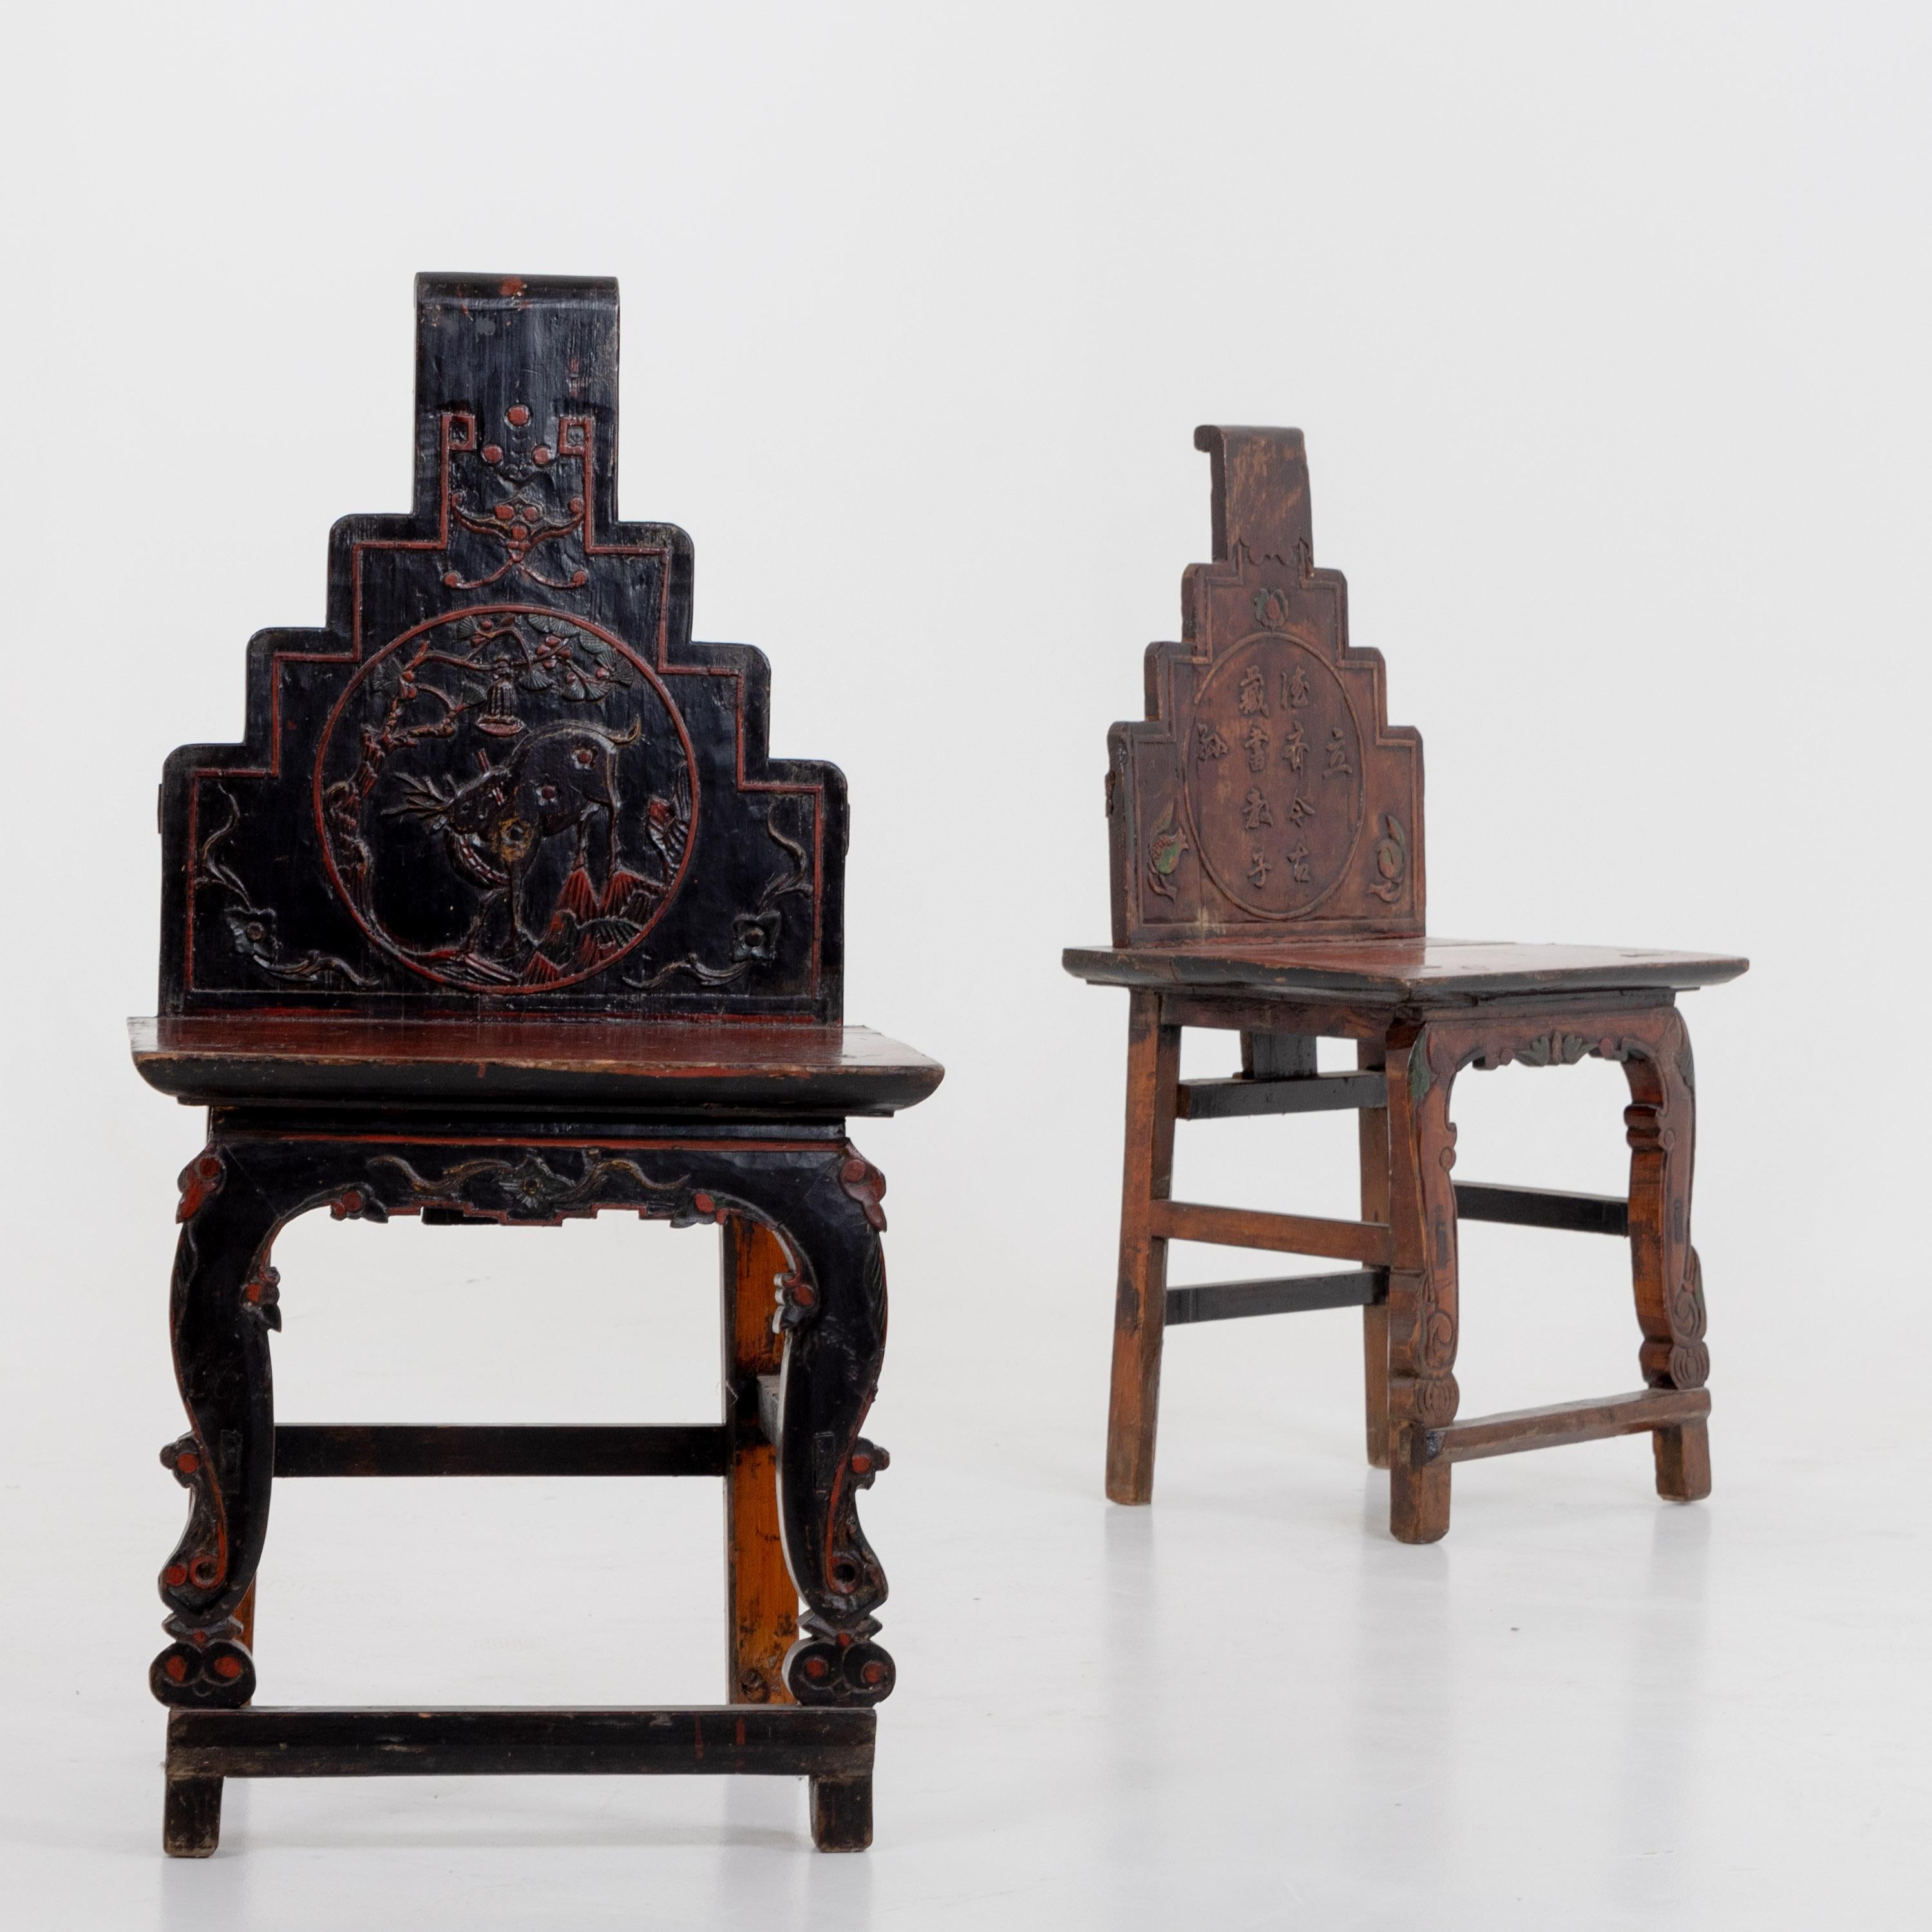 Chinese Export Pair of Chinese Wooden Chairs